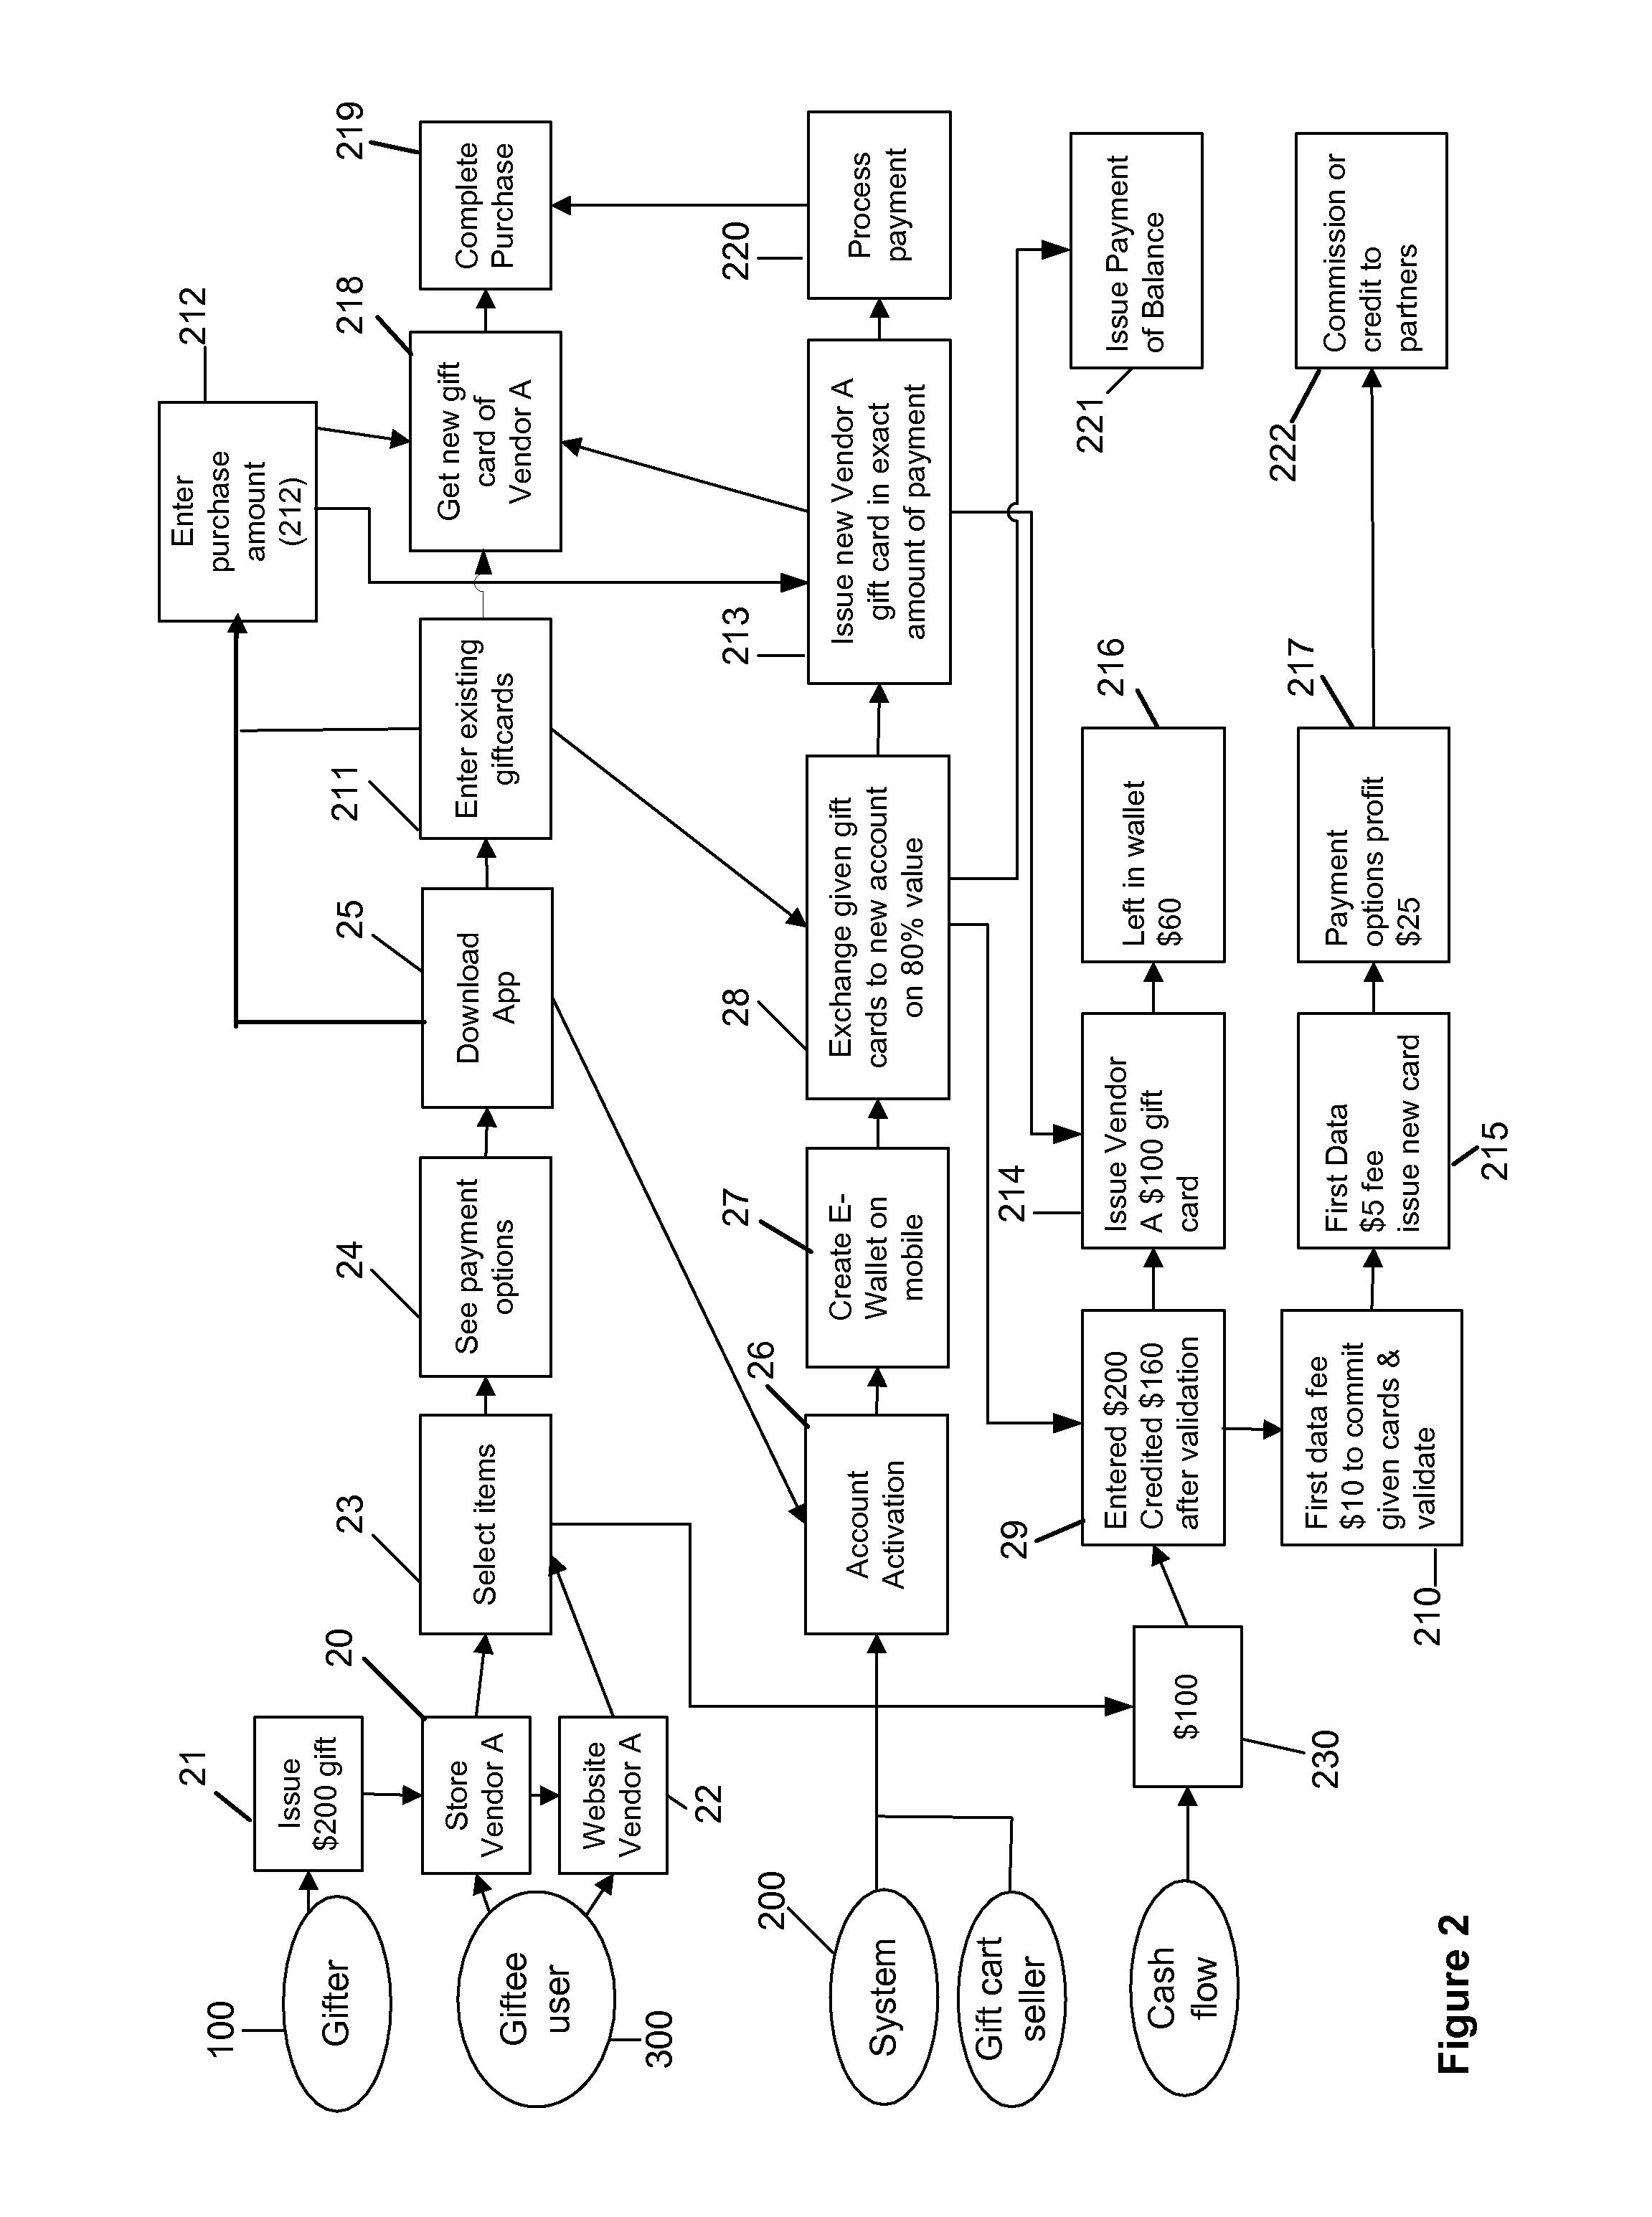 System and method for crowdsourcing, selecting, transacting gifts and financial discounts in physical stores and e-commerce environments